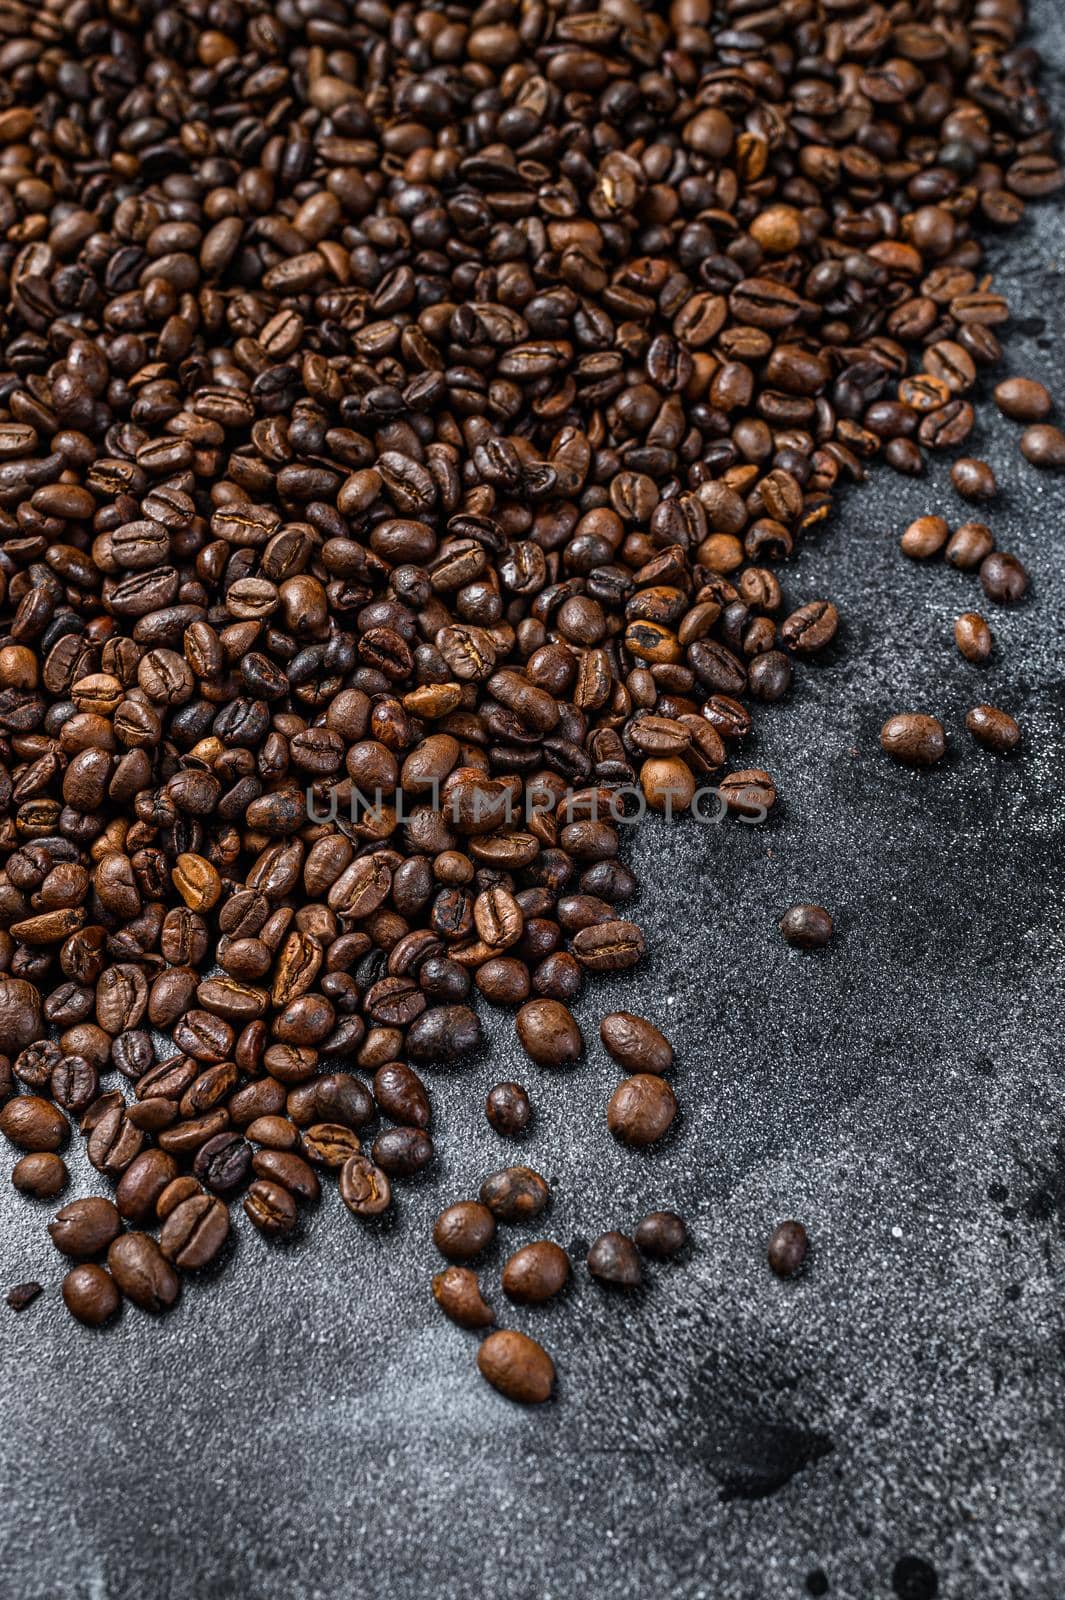 Roasted coffee beans on rustic table. Black background. Top view.